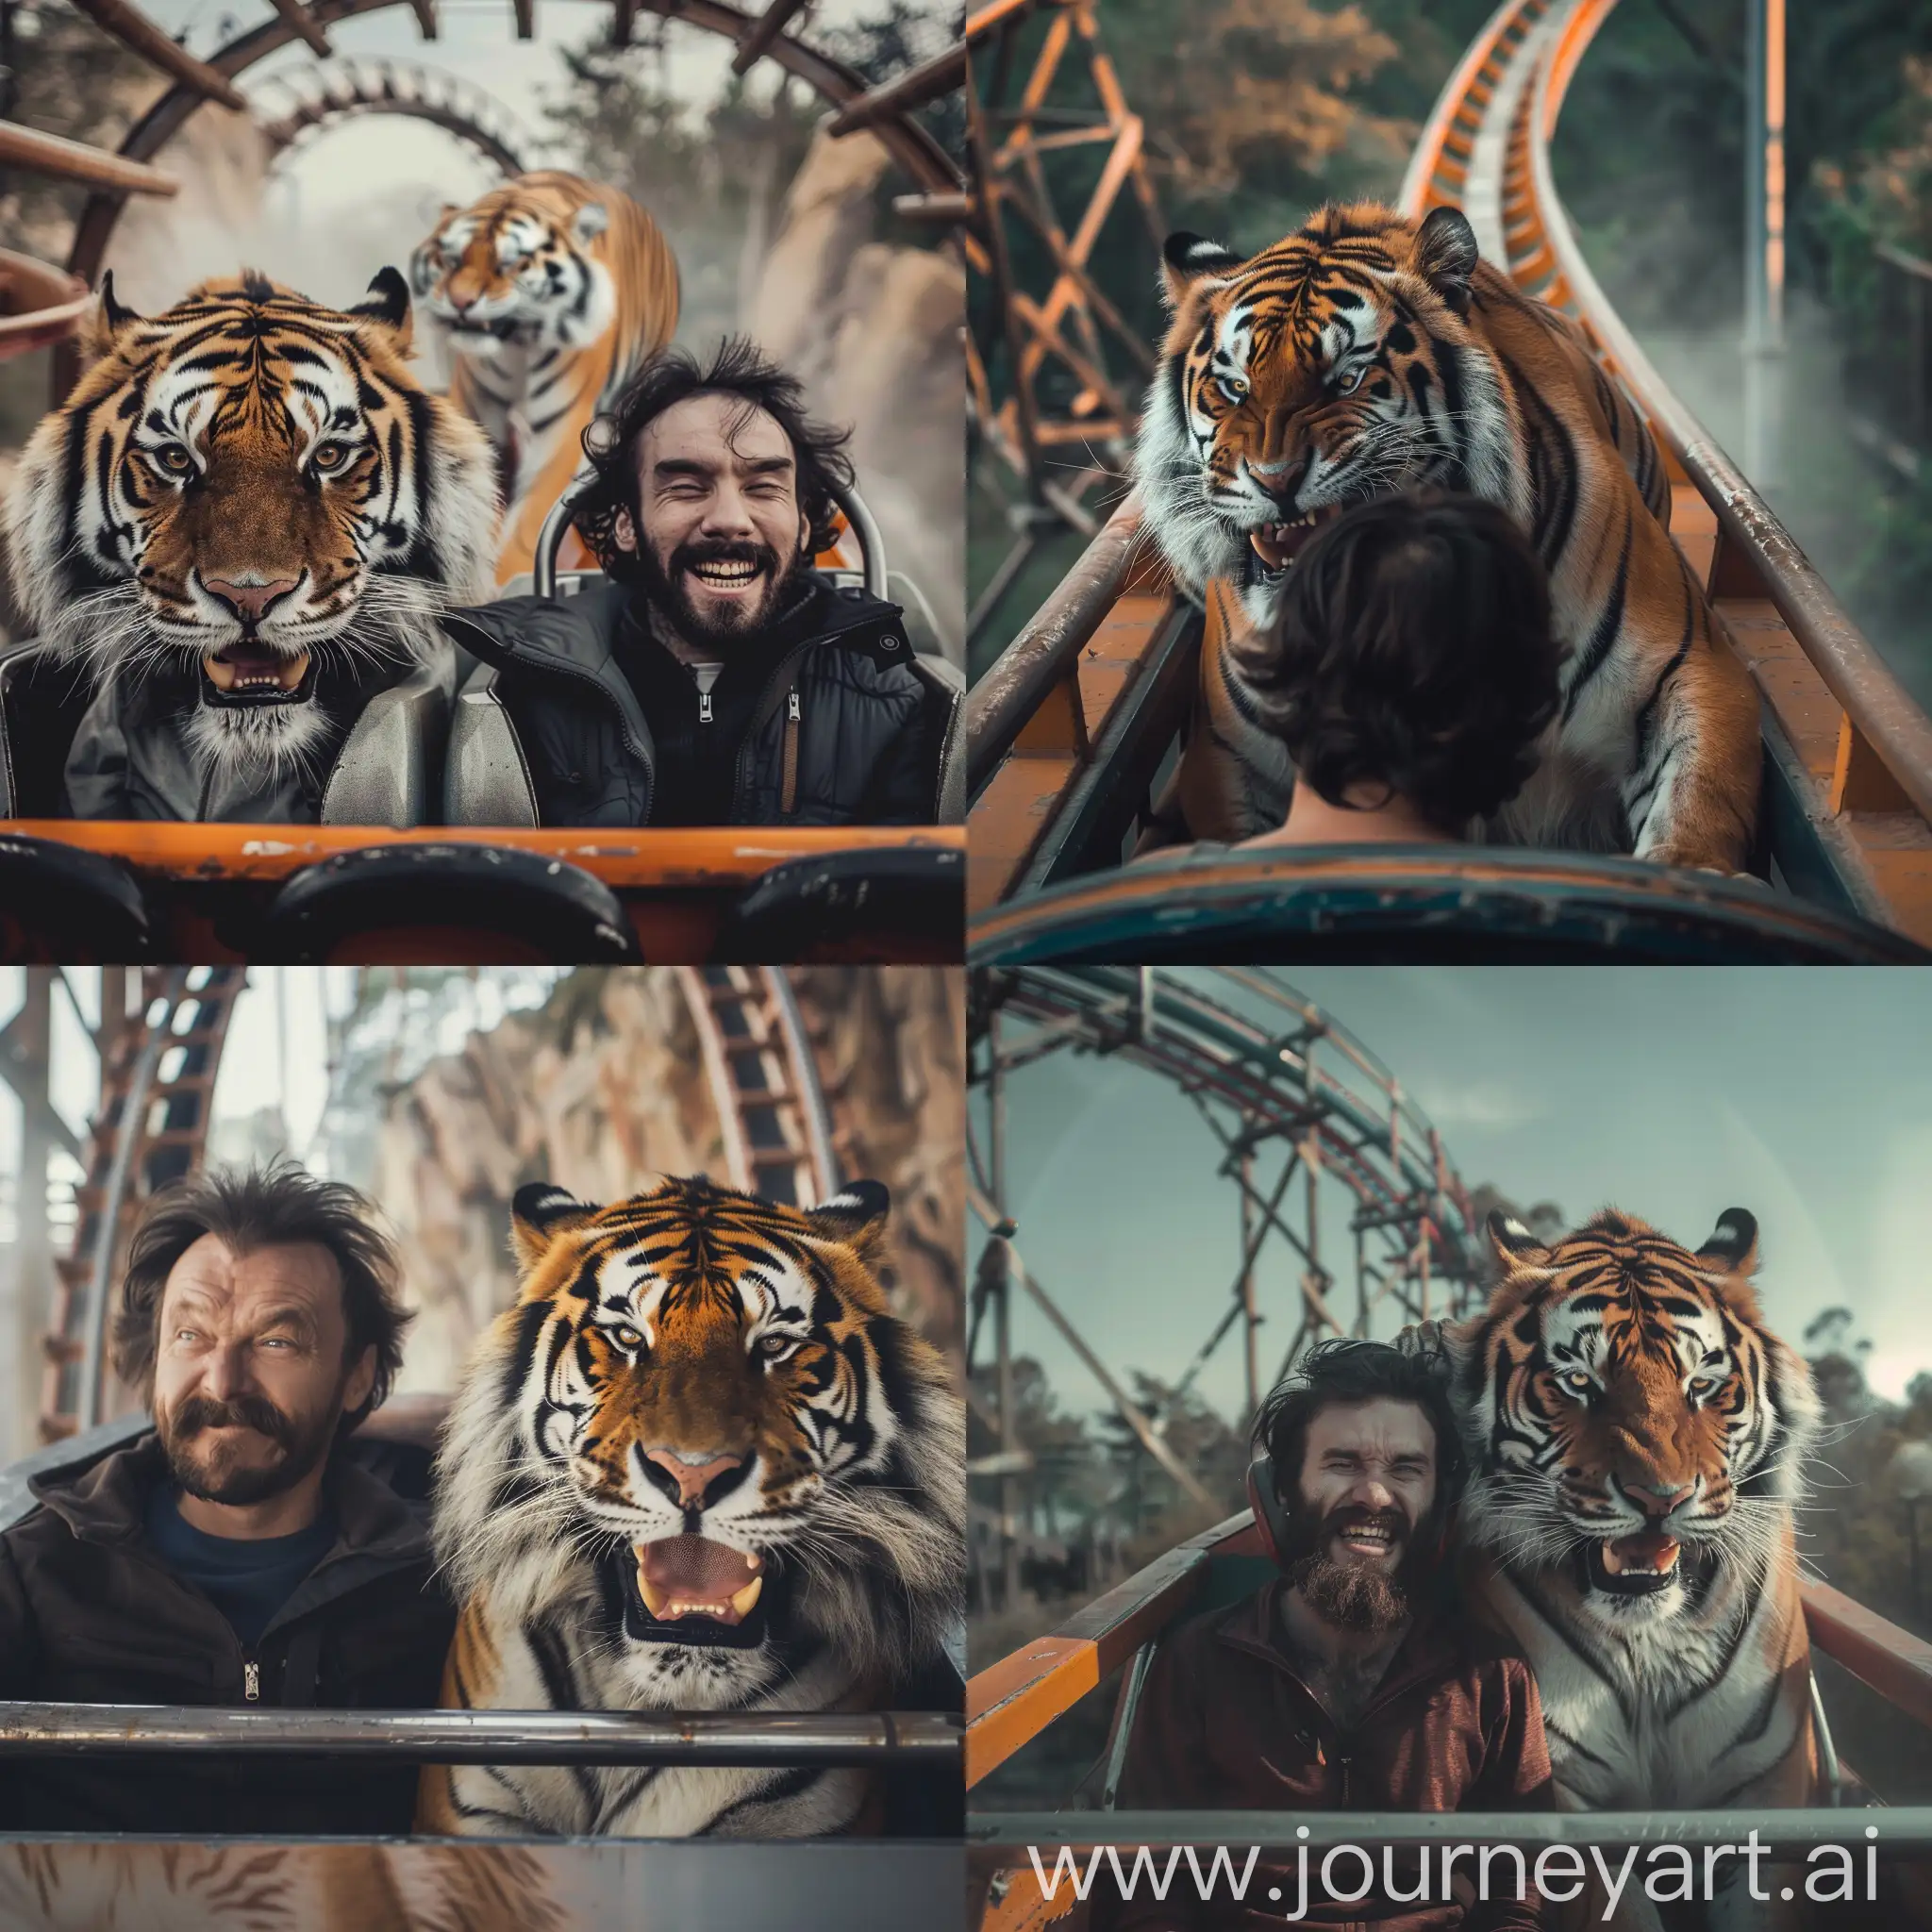 Fearful-Man-Riding-Rollercoaster-with-Smiling-Tiger